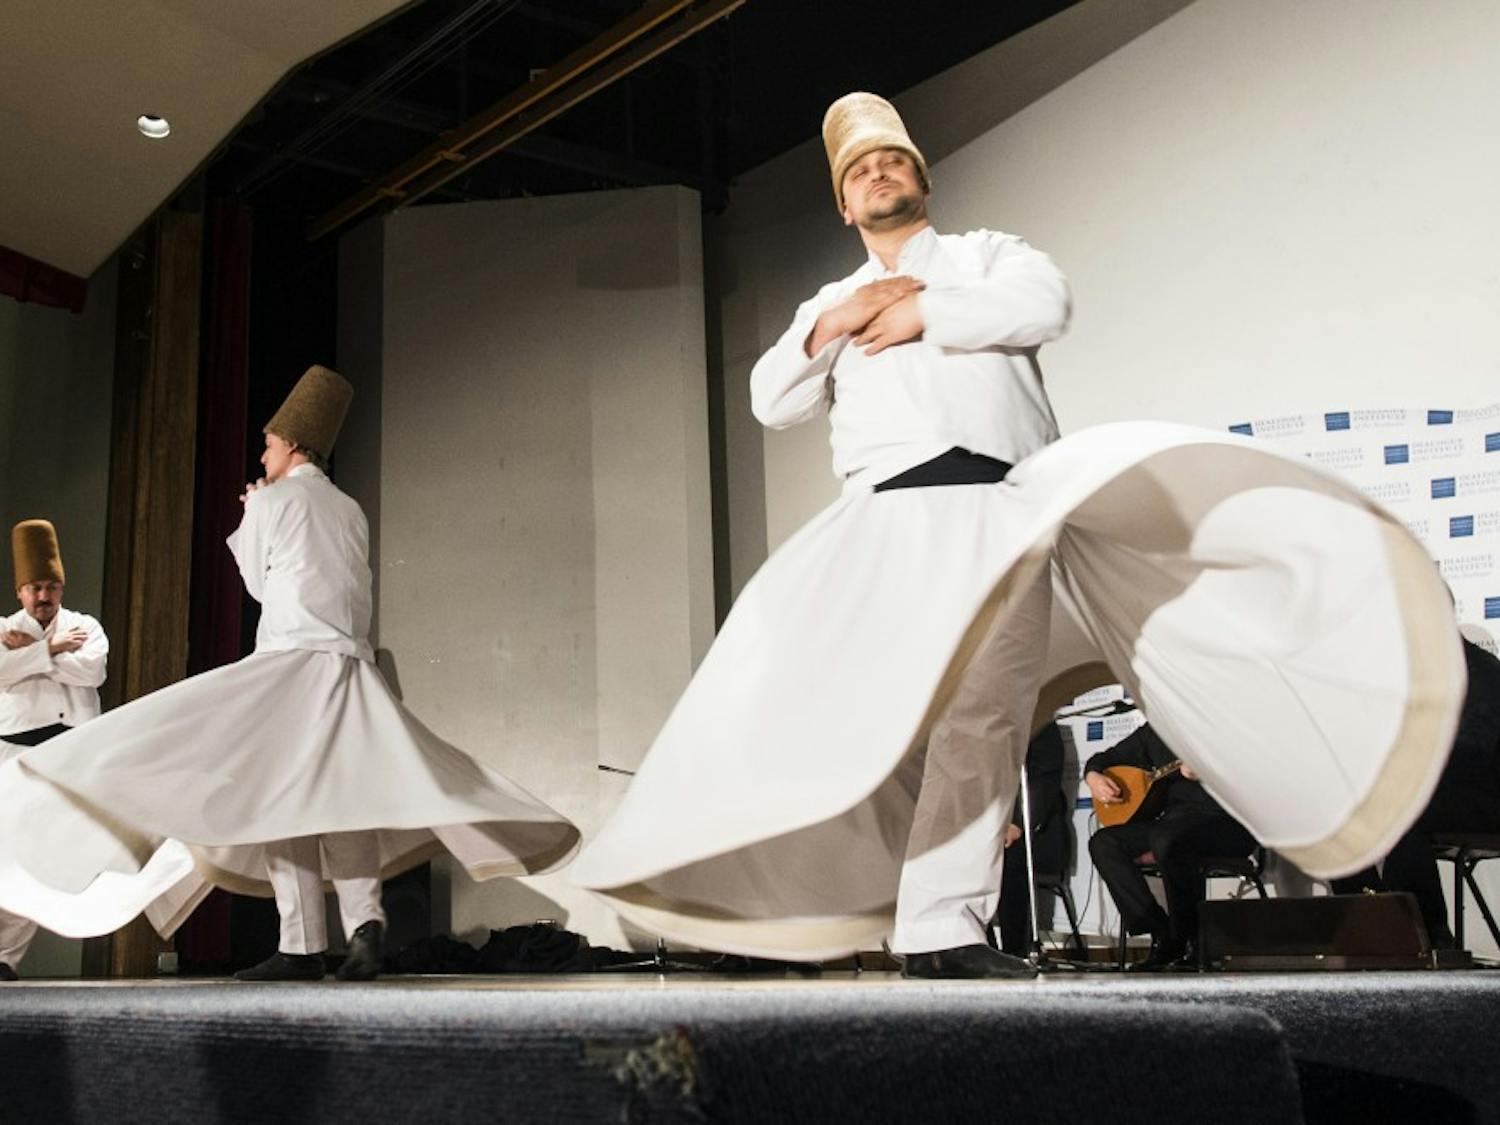 The Whirling Dervishes of Rumi dance to Sufi music at the UNM Continuing Education Center auditorium on Friday evening. UNMs Continuing Education department in collaboration with the Raindrop Foundation hosted the event to break stereotypes of Islam in Albuquerque community.